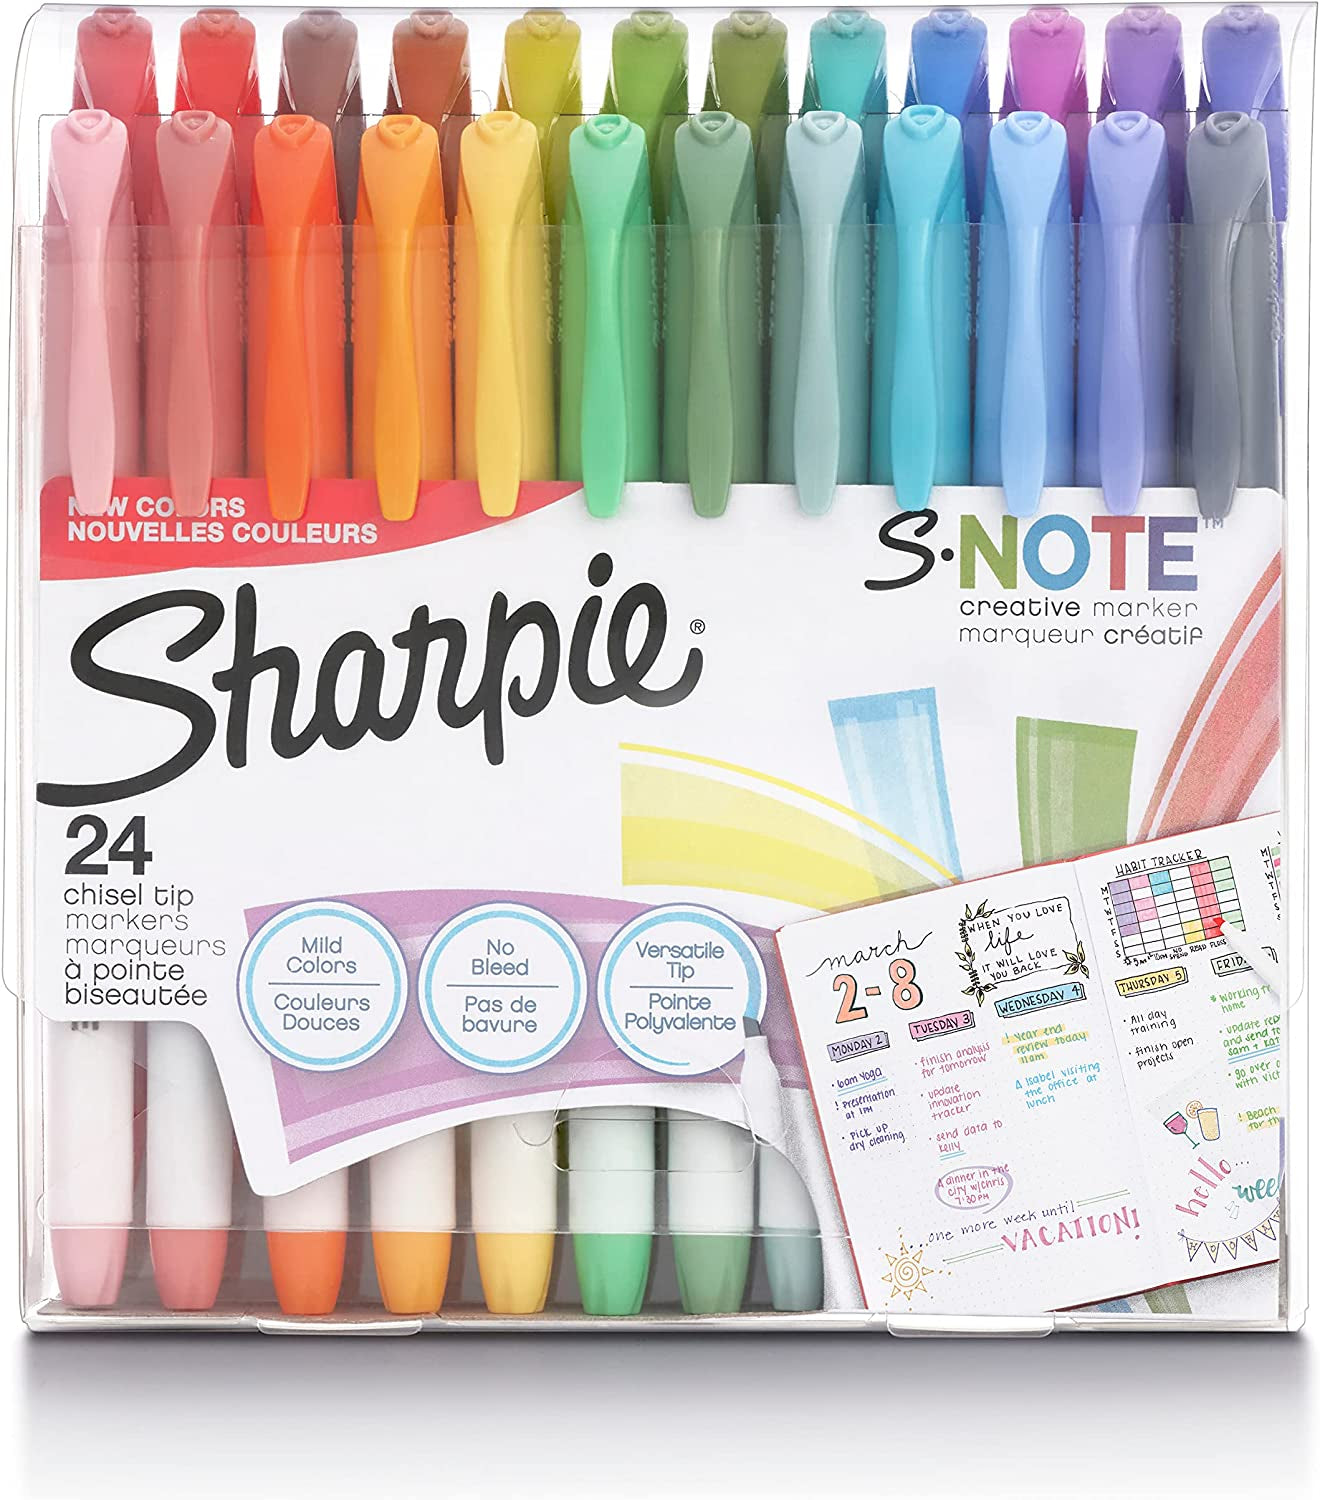 S-Note Creative Markers, Pastel Highlighters, Art Marker Set, Assorted Colors, Chisel Tip, 24 Count